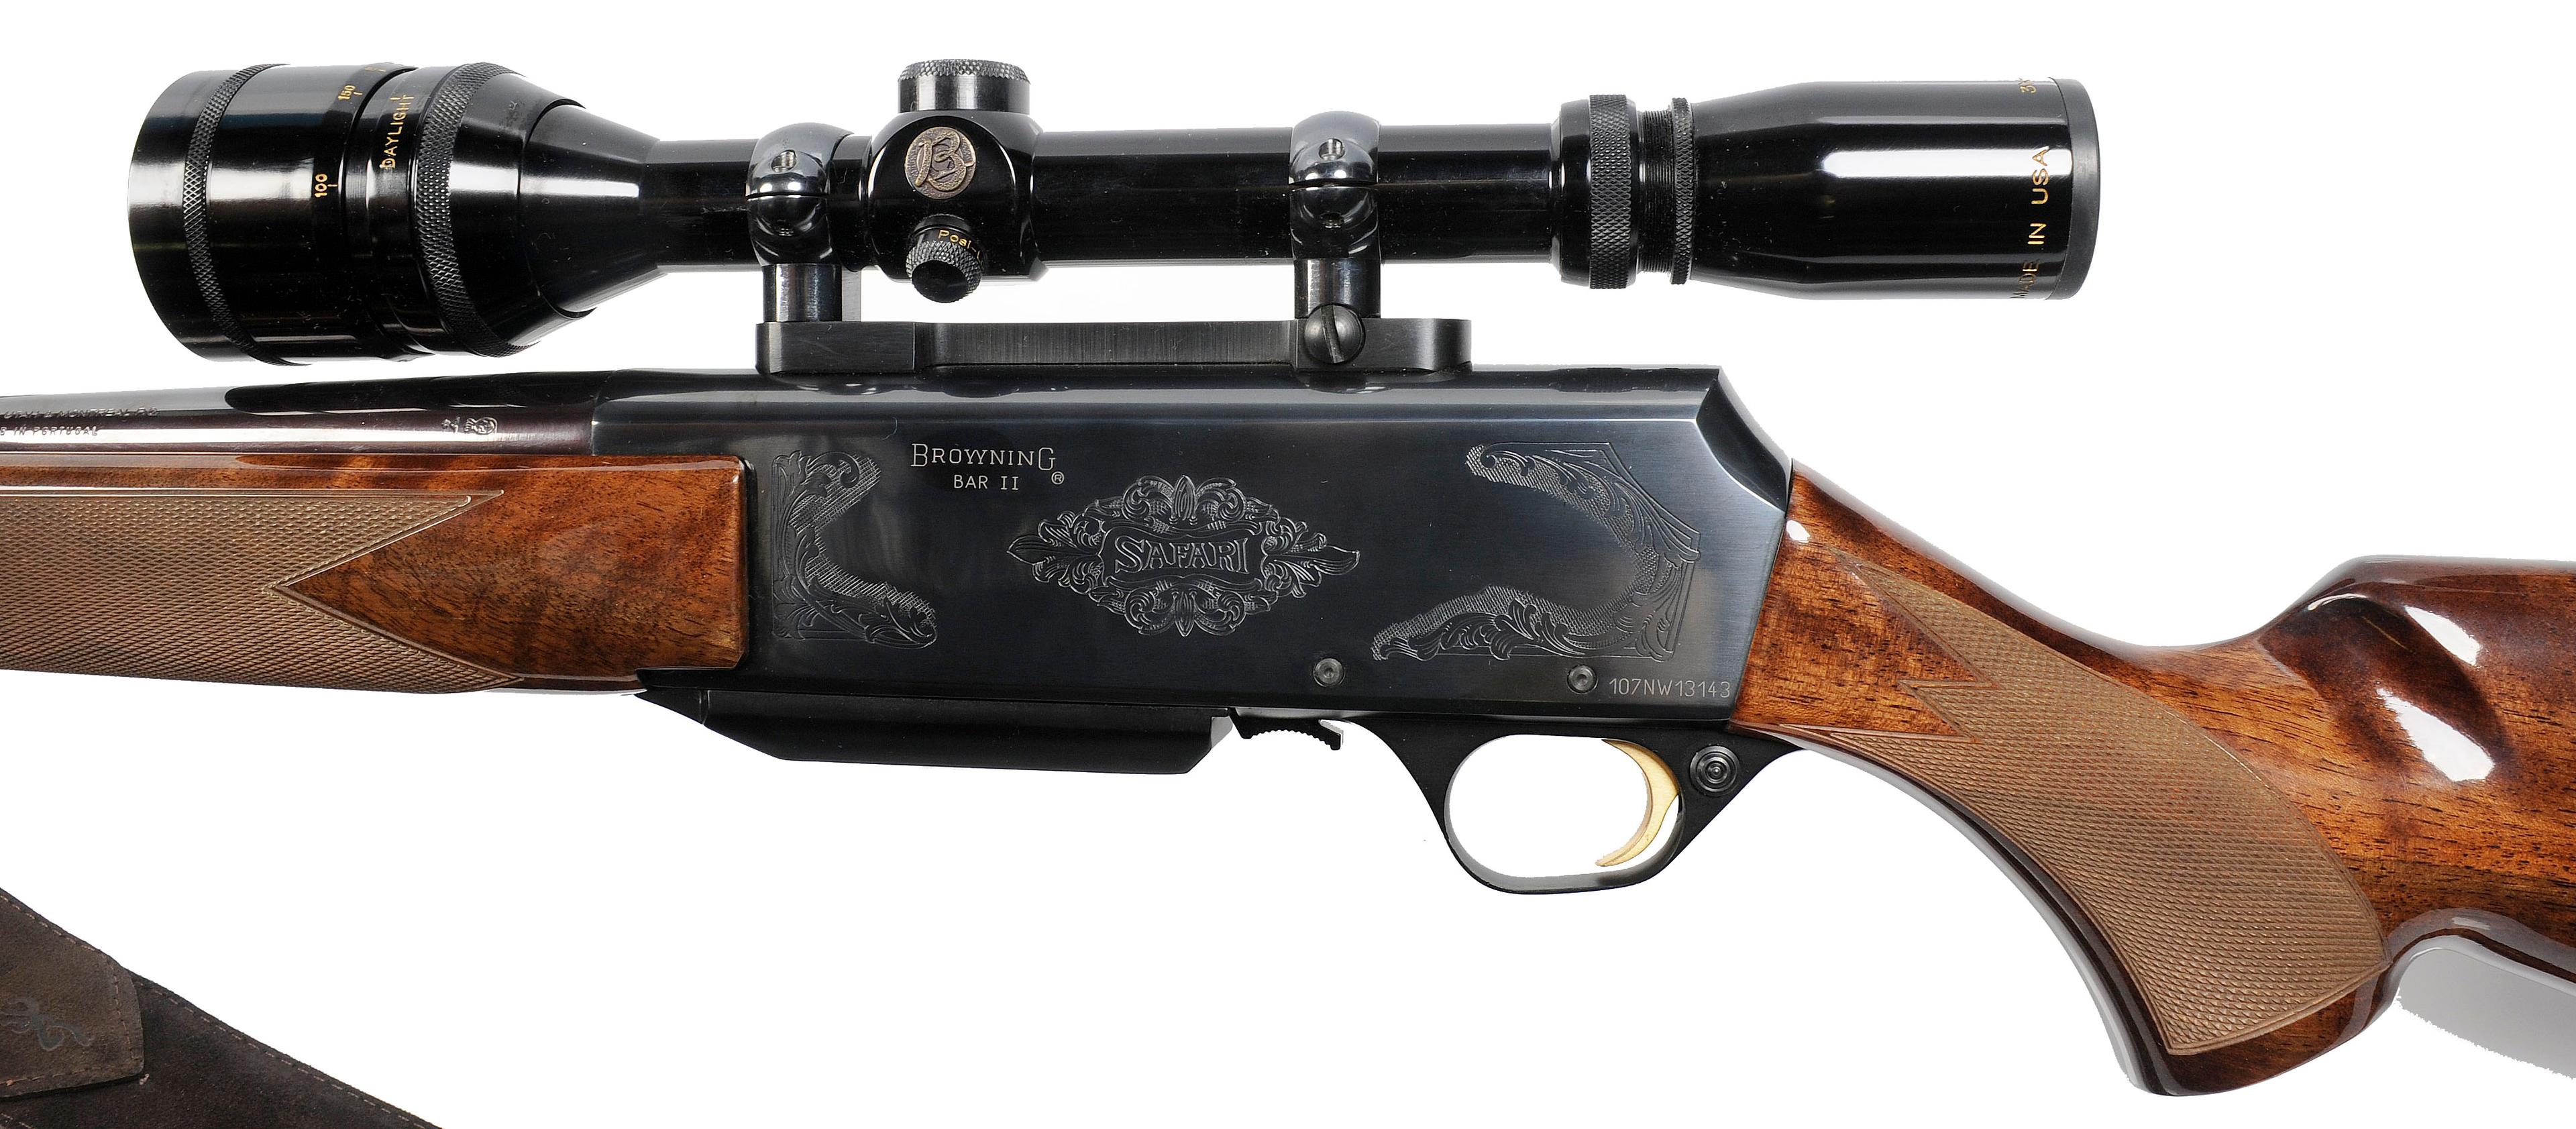 Browning BAR II Safari .300 Winchester Magnum Semi Automatic Rifle FFL Required 107NW13143 (PAG1)